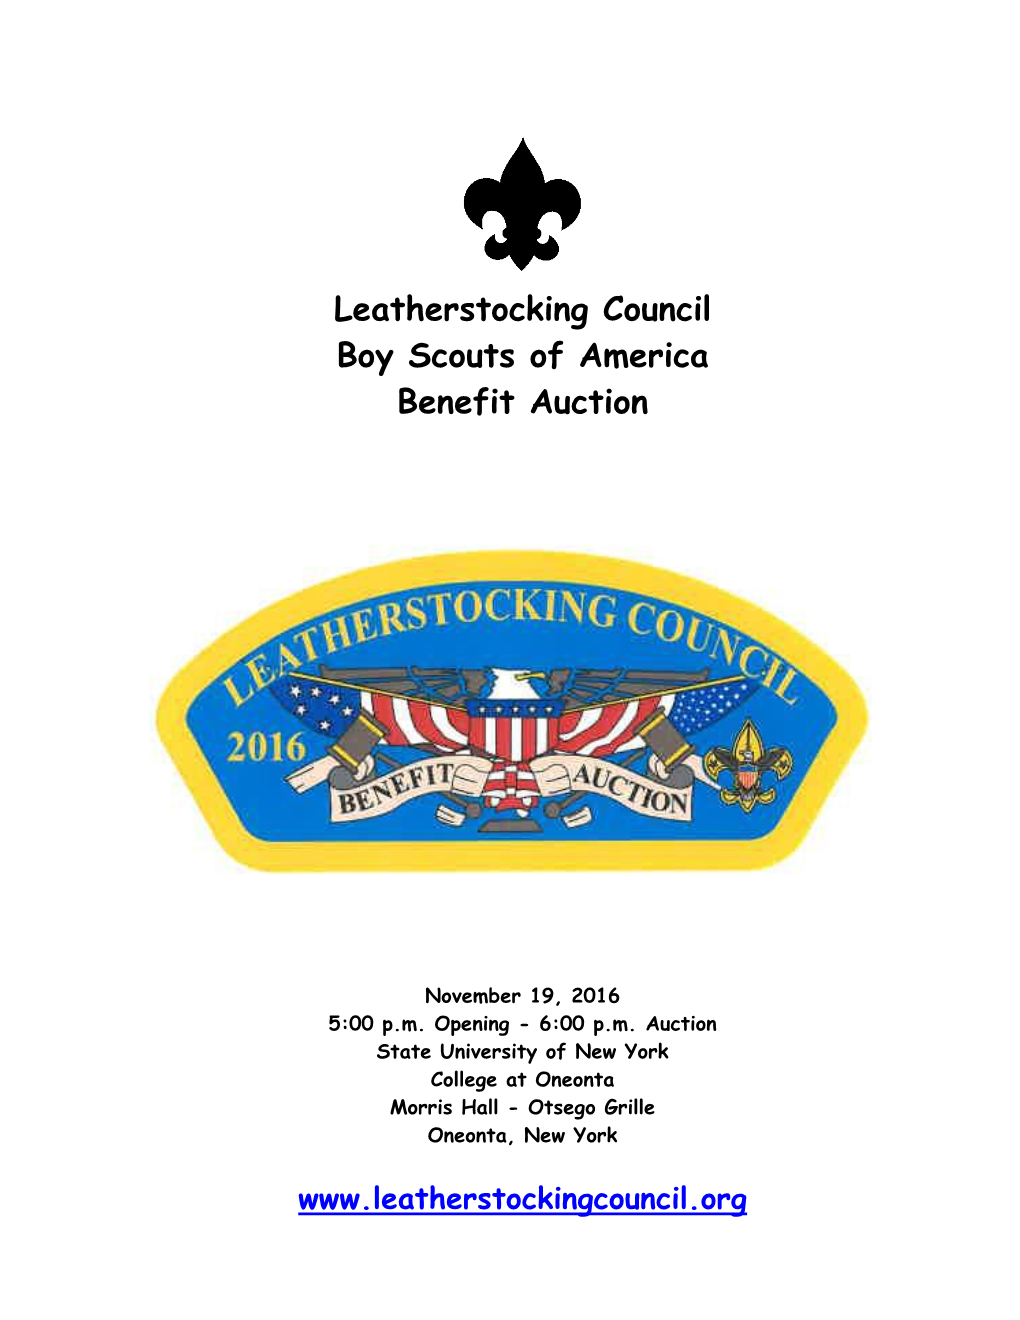 Leatherstocking Council Boy Scouts of America Benefit Auction